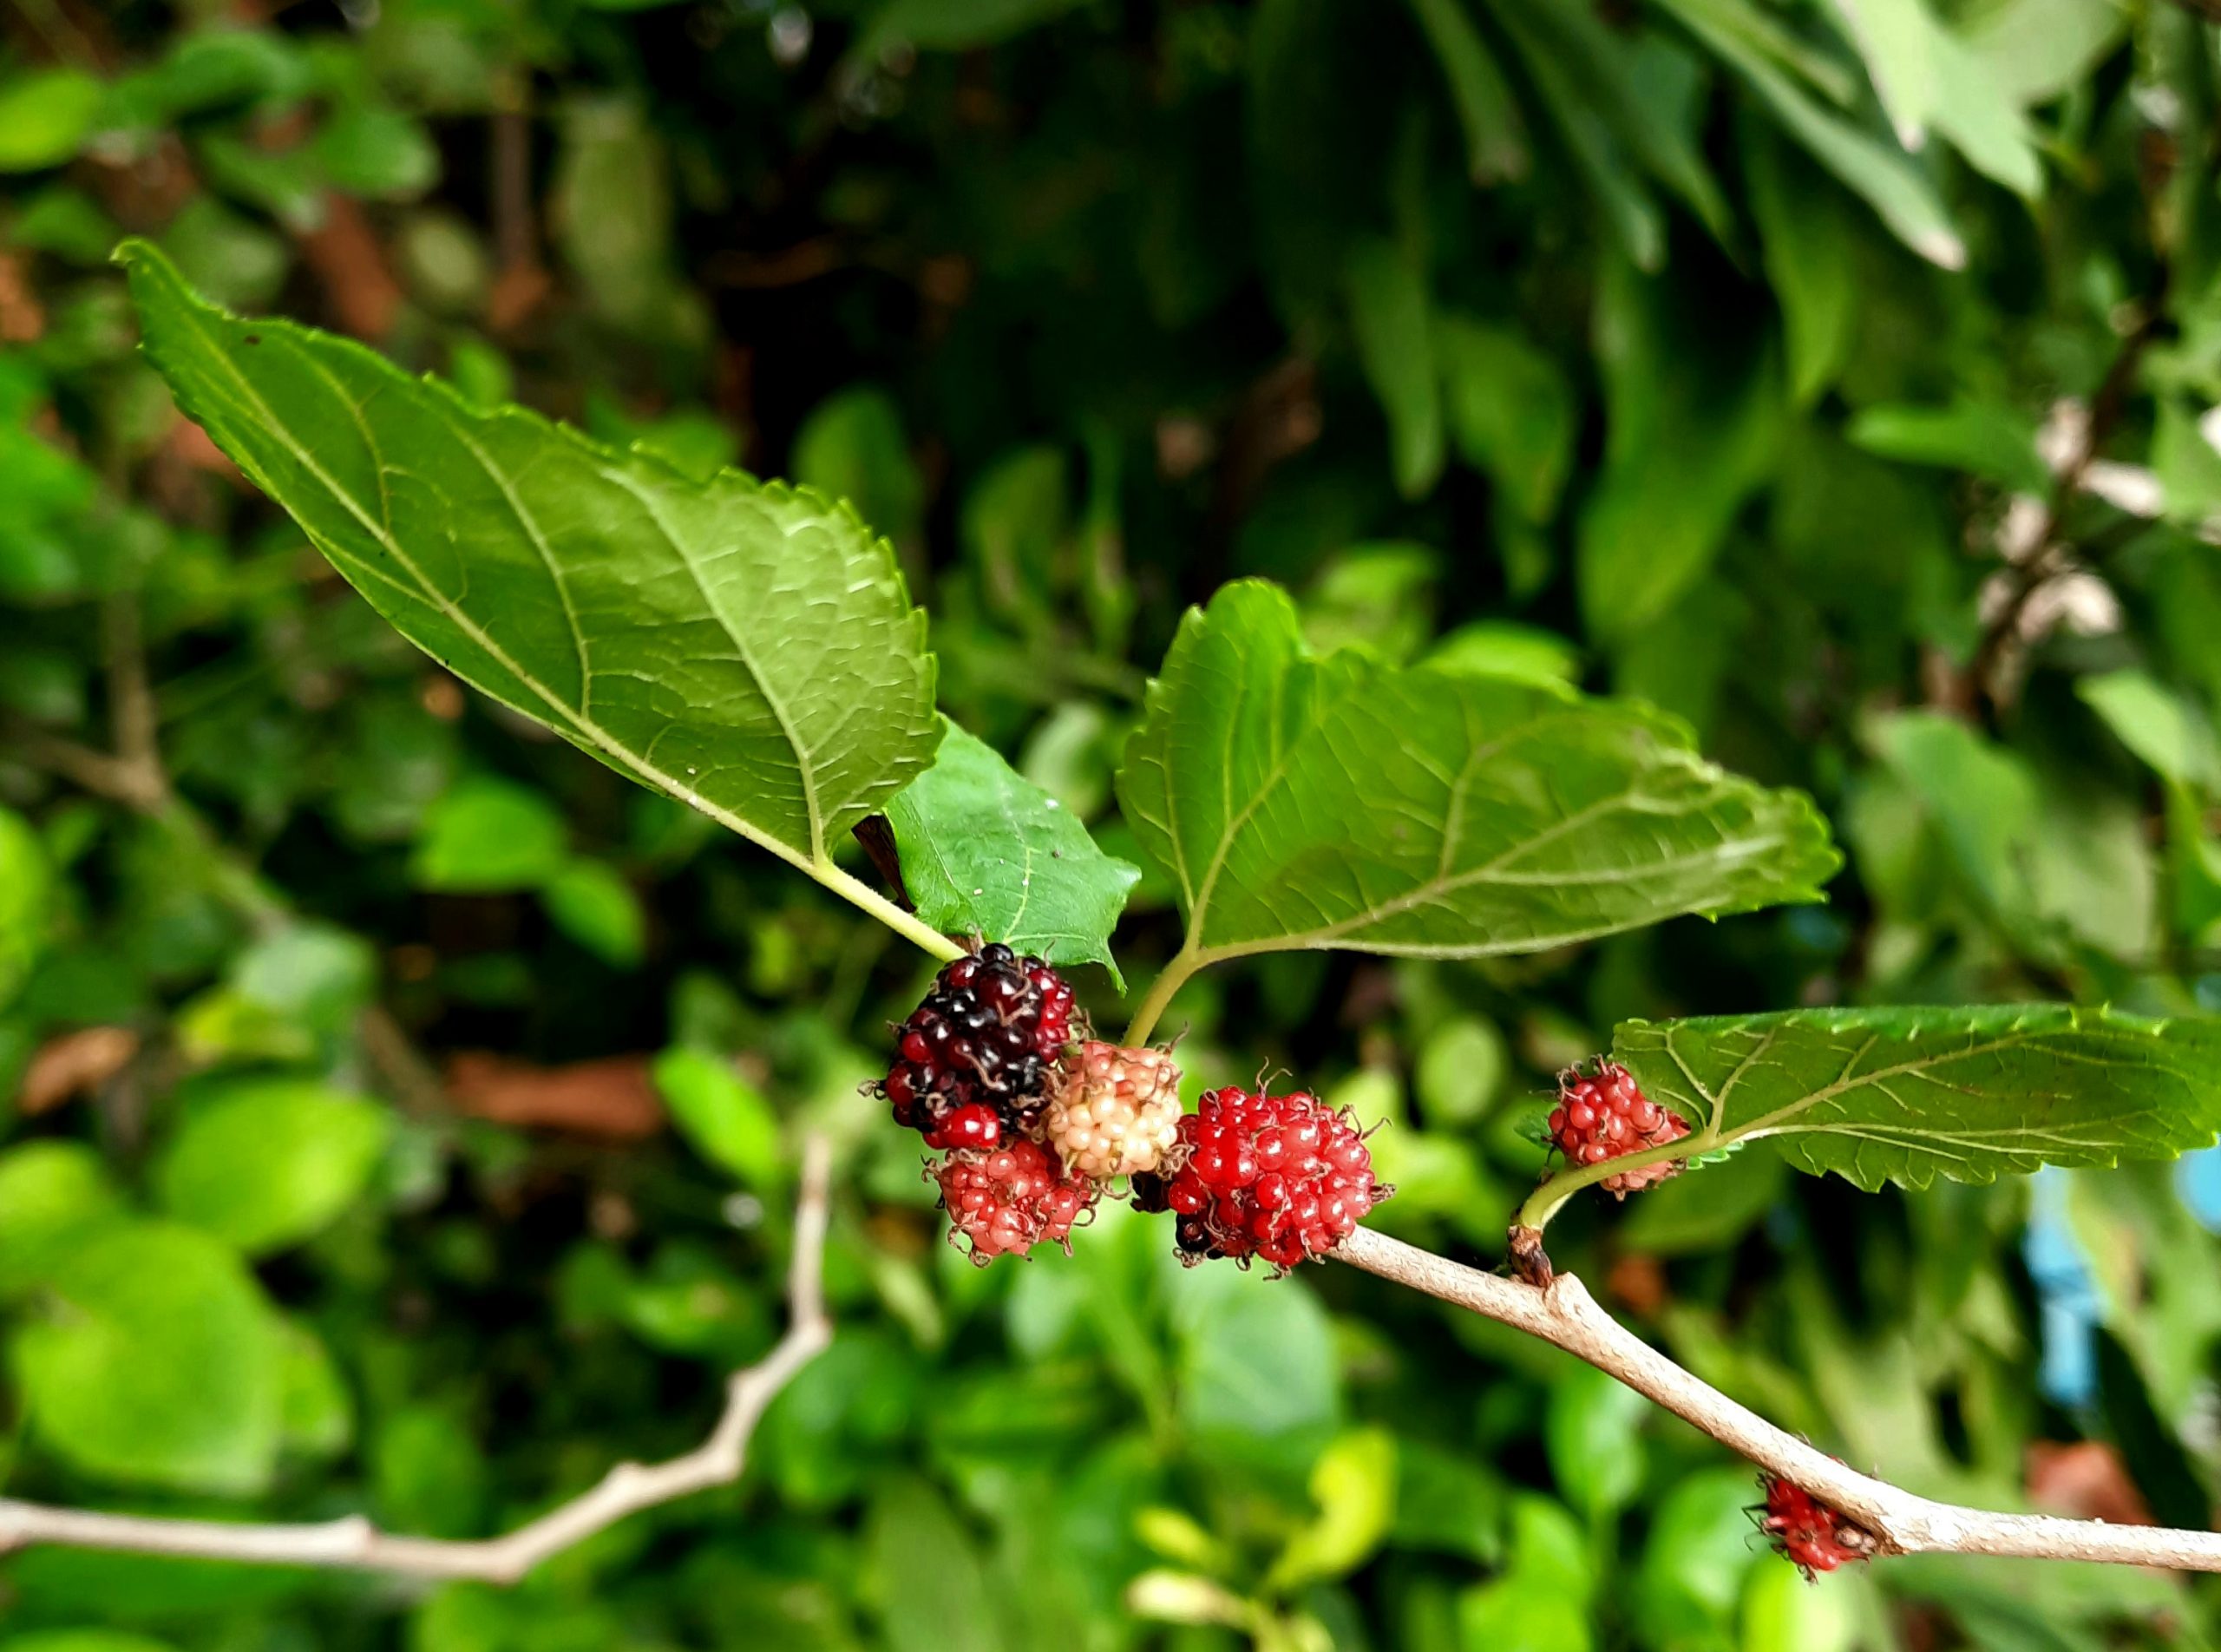 Mulberries on its plant